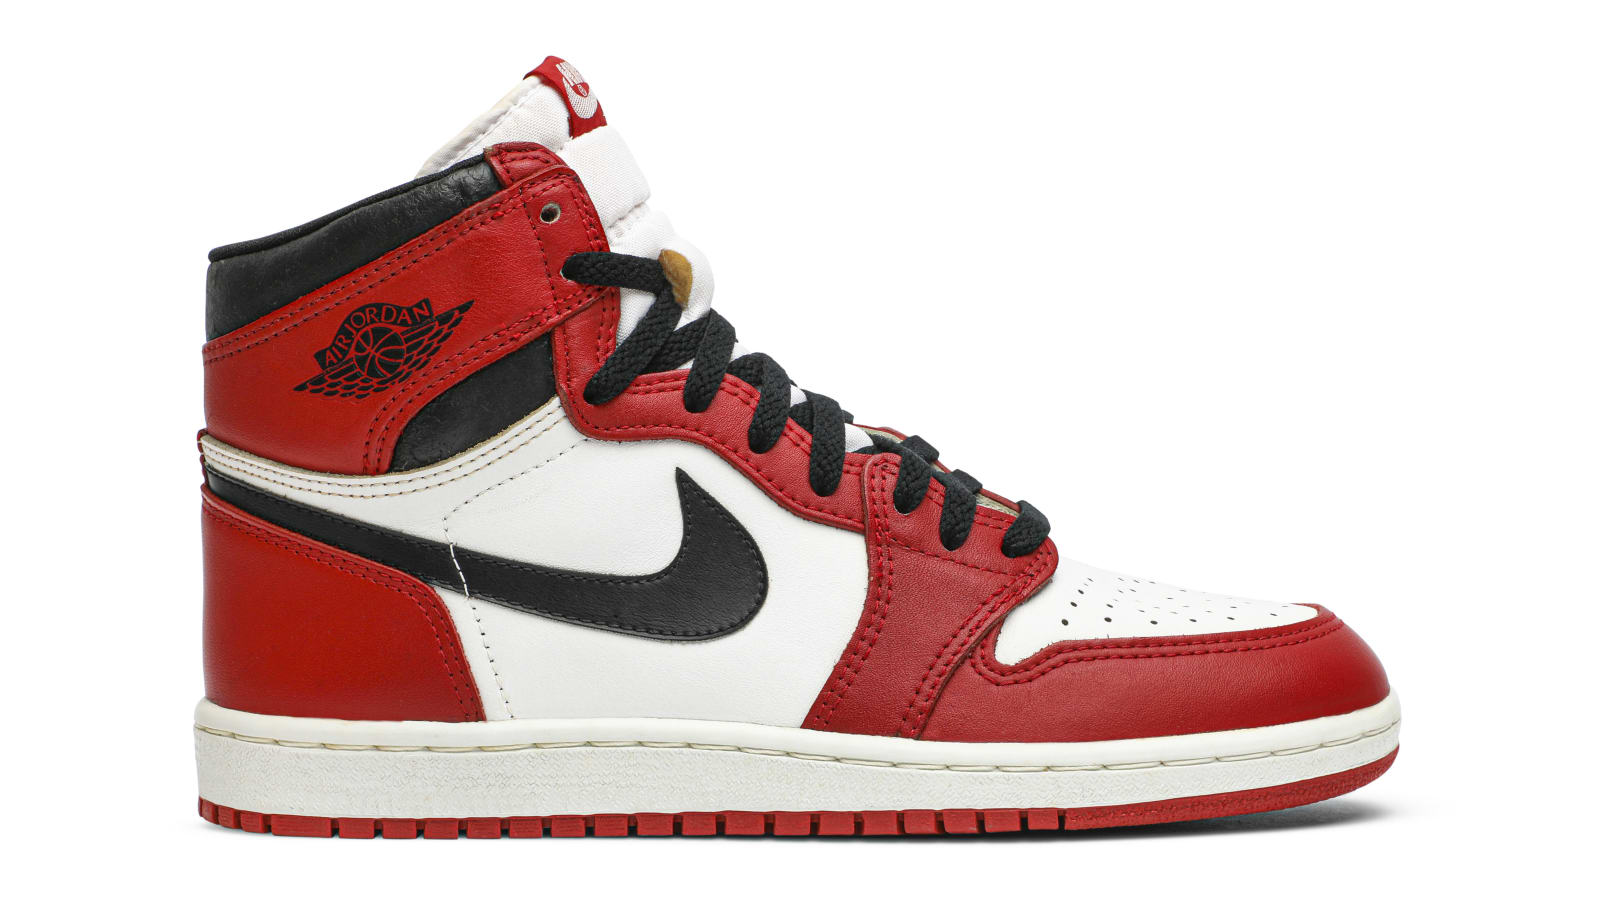 The 'Chicago' Air Jordan 1 Is Returning This Holiday Season